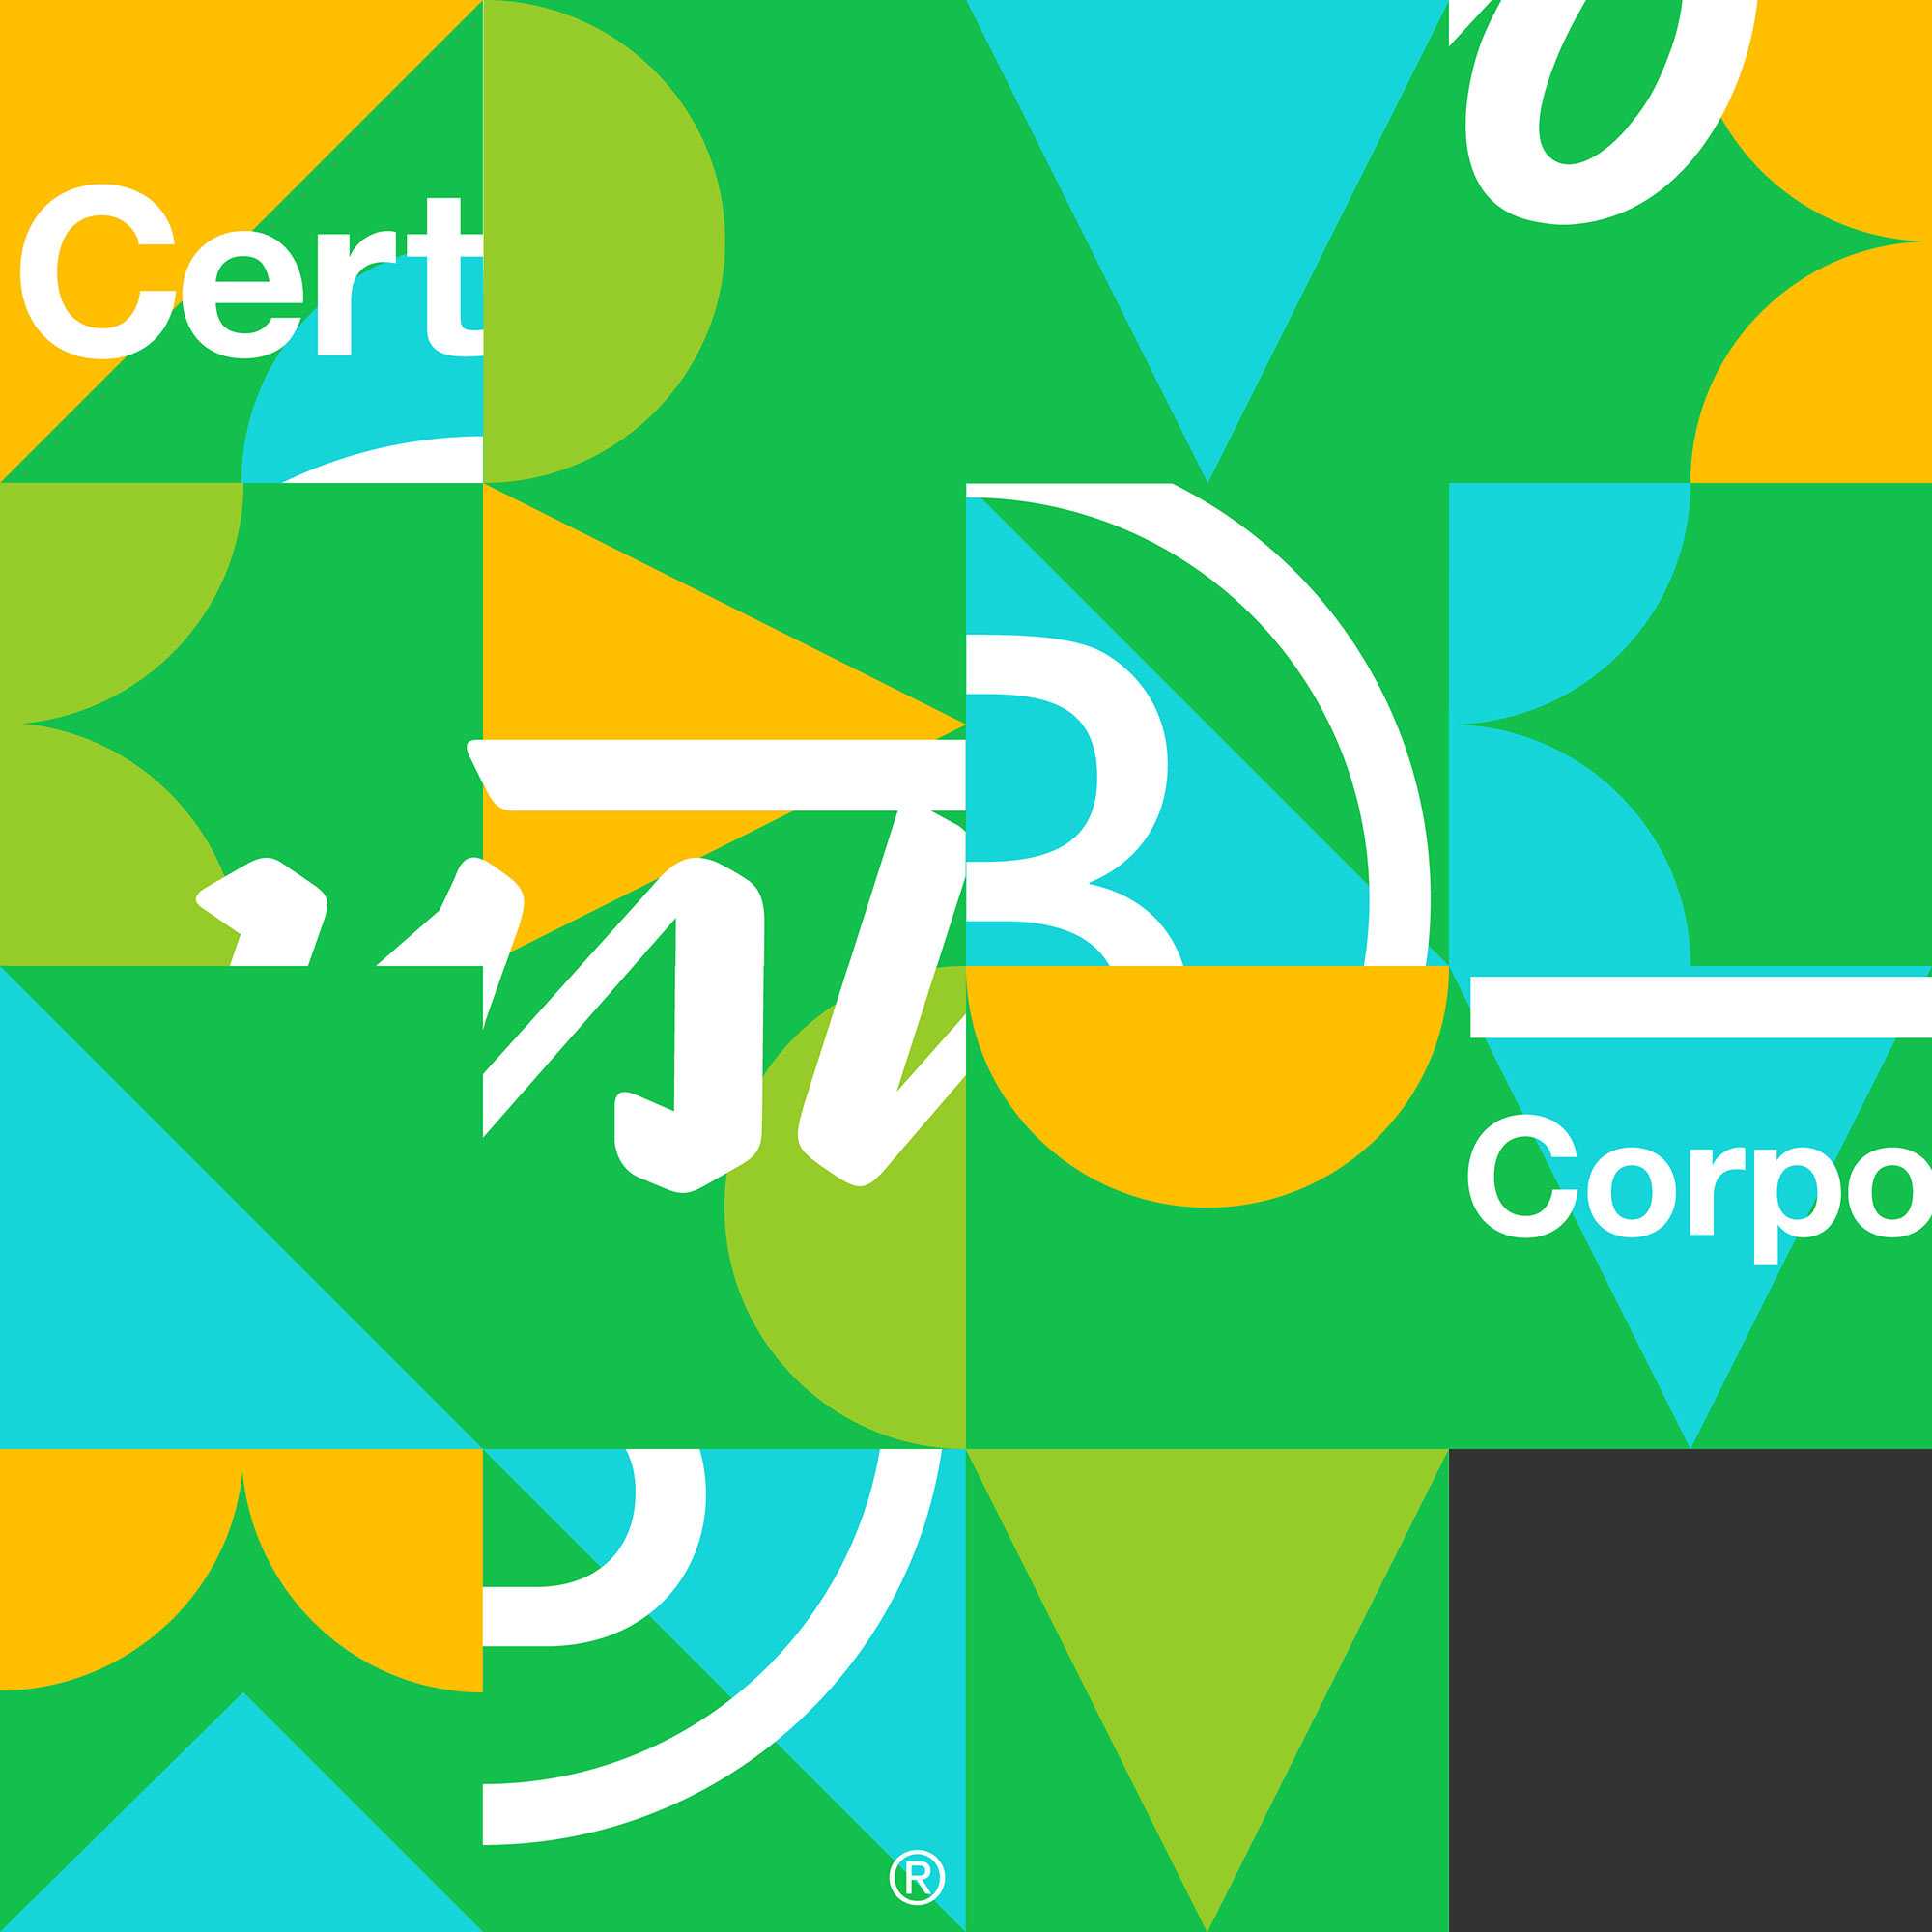 A mixed up mosaic of the ustwo and B Corp logos